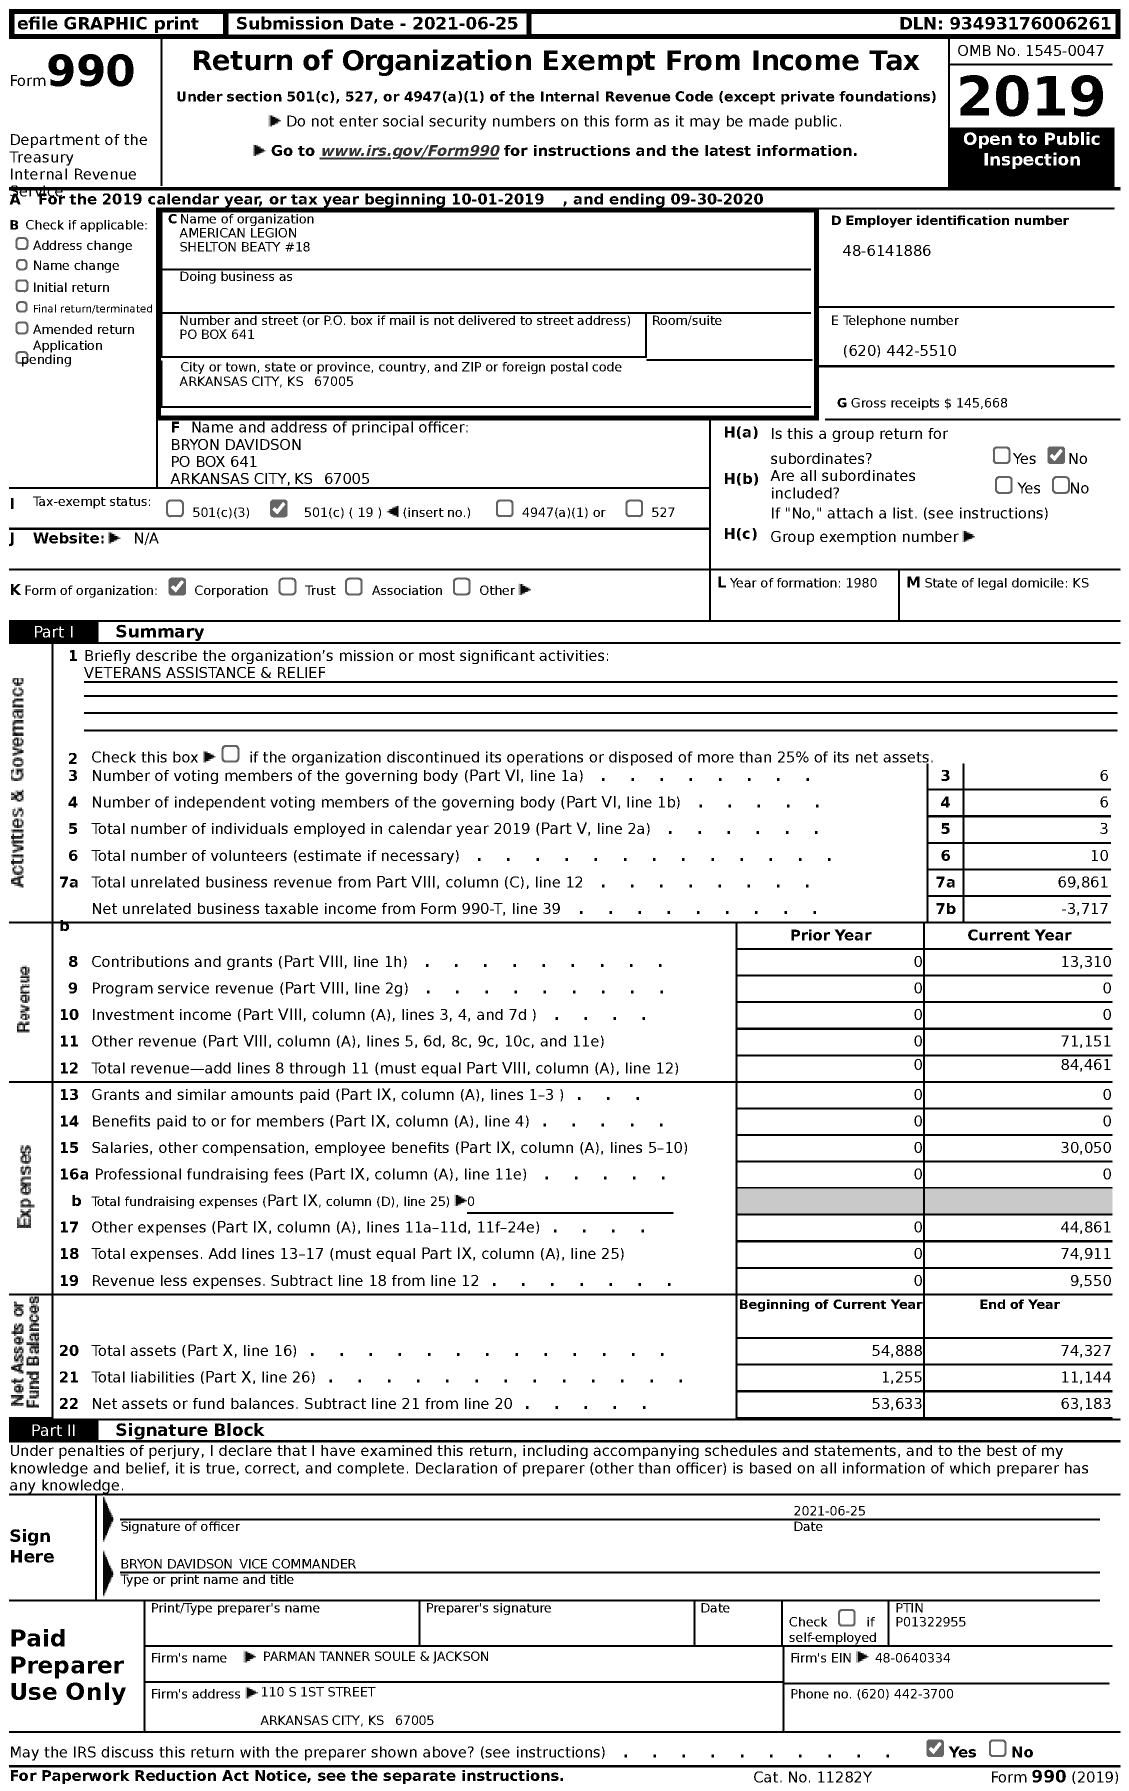 Image of first page of 2019 Form 990 for American Legion - 18 Shelton Beaty